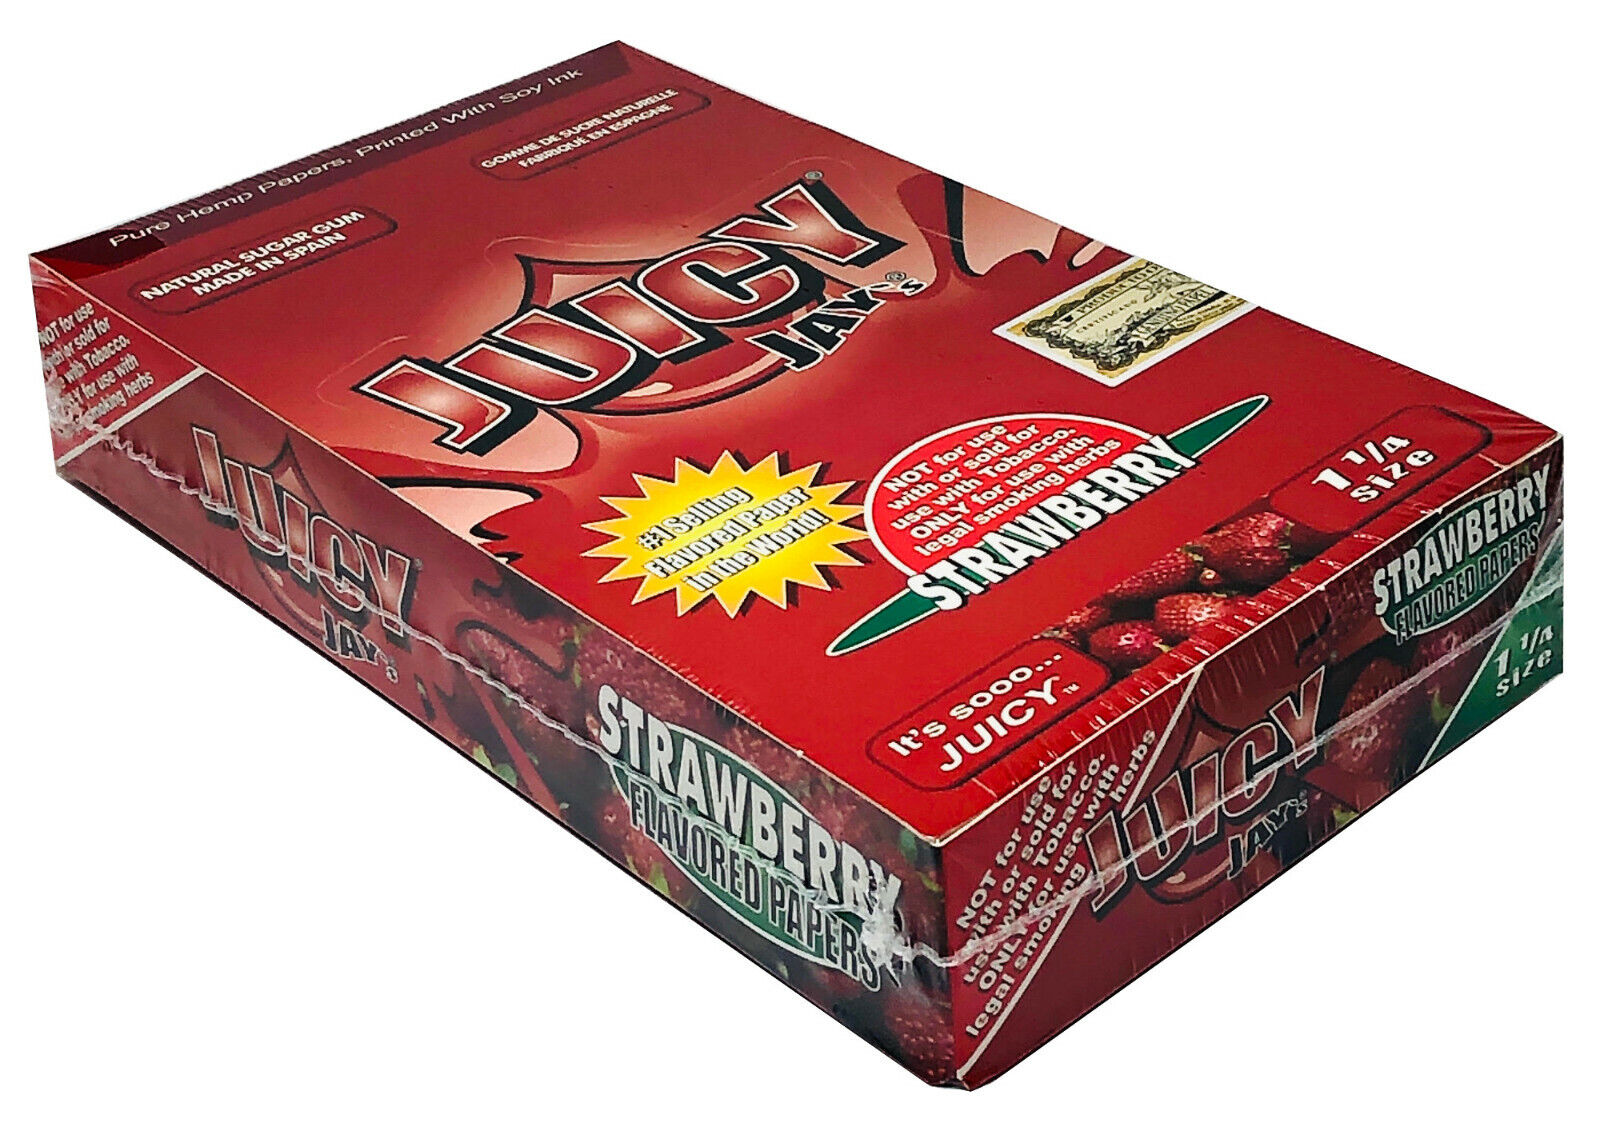 Juicy Jay's Strawberry Flavored Rolling Papers 1.25 Box of 24